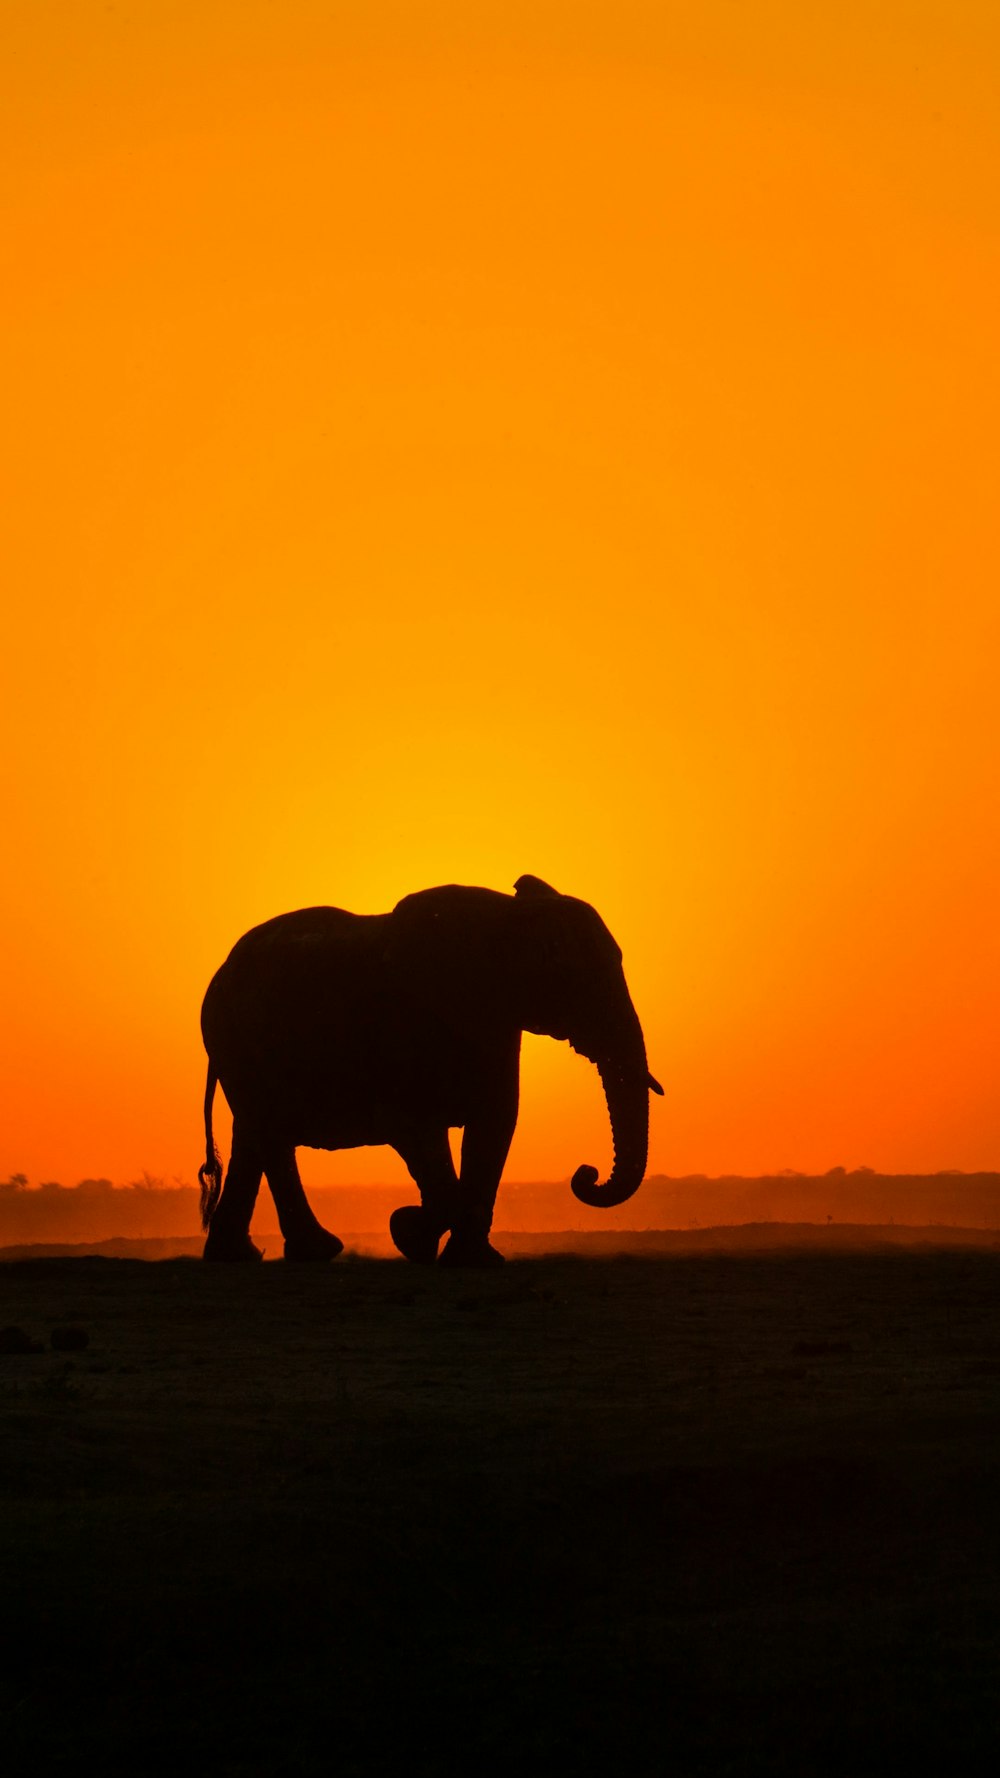 silhouette of elephant walking on brown field during sunset